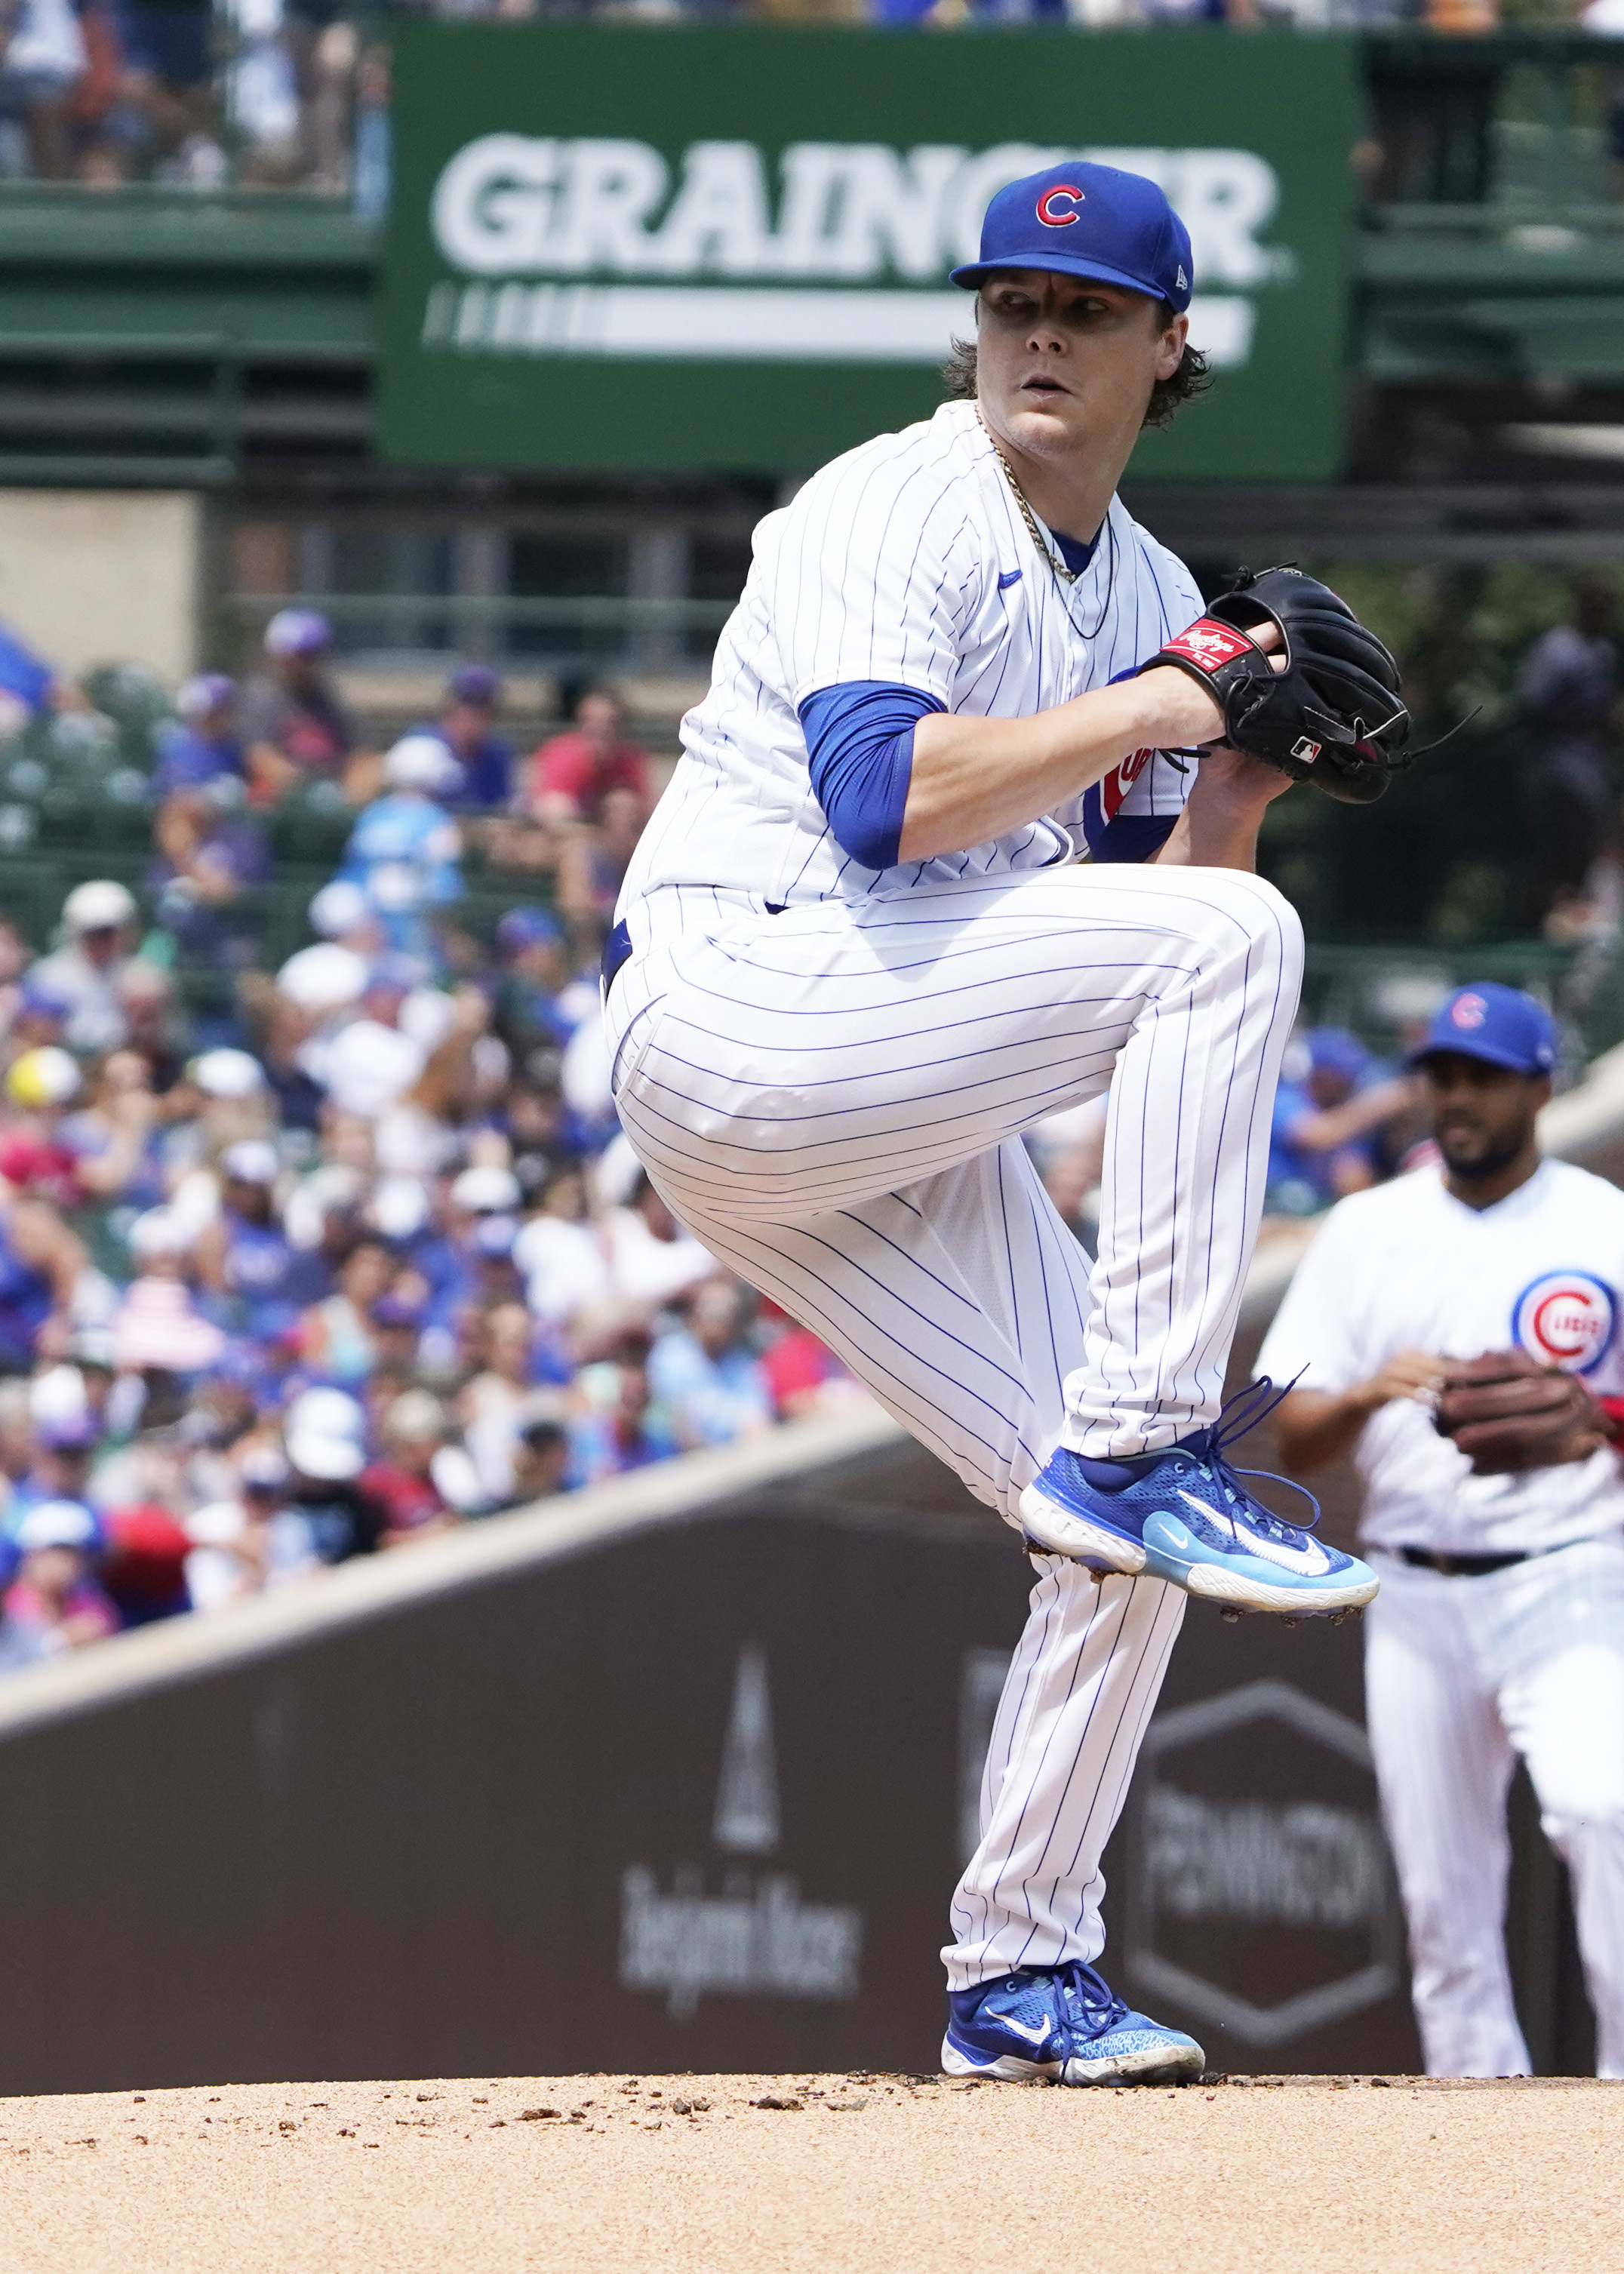 Cody Bellinger and Justin Steele help Chicago Cubs top Kansas City Royals  6-4 National News - Bally Sports